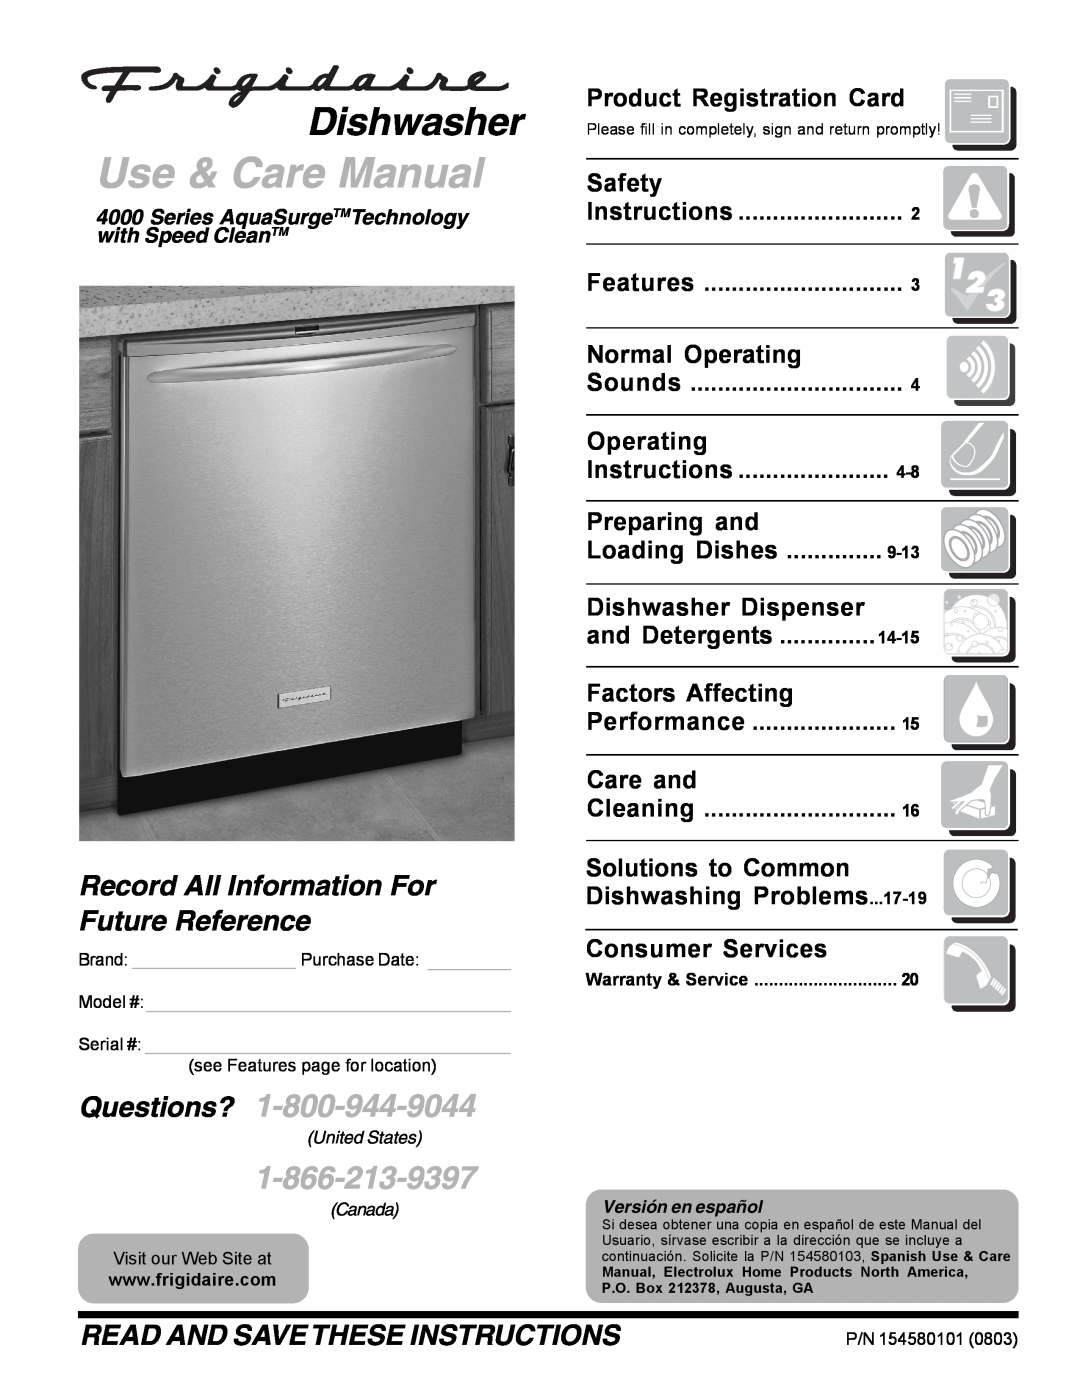 Frigidaire 4000 warranty Product Registration Card, Safety, Normal Operating, Preparing and, Loading Dishes, Care and 